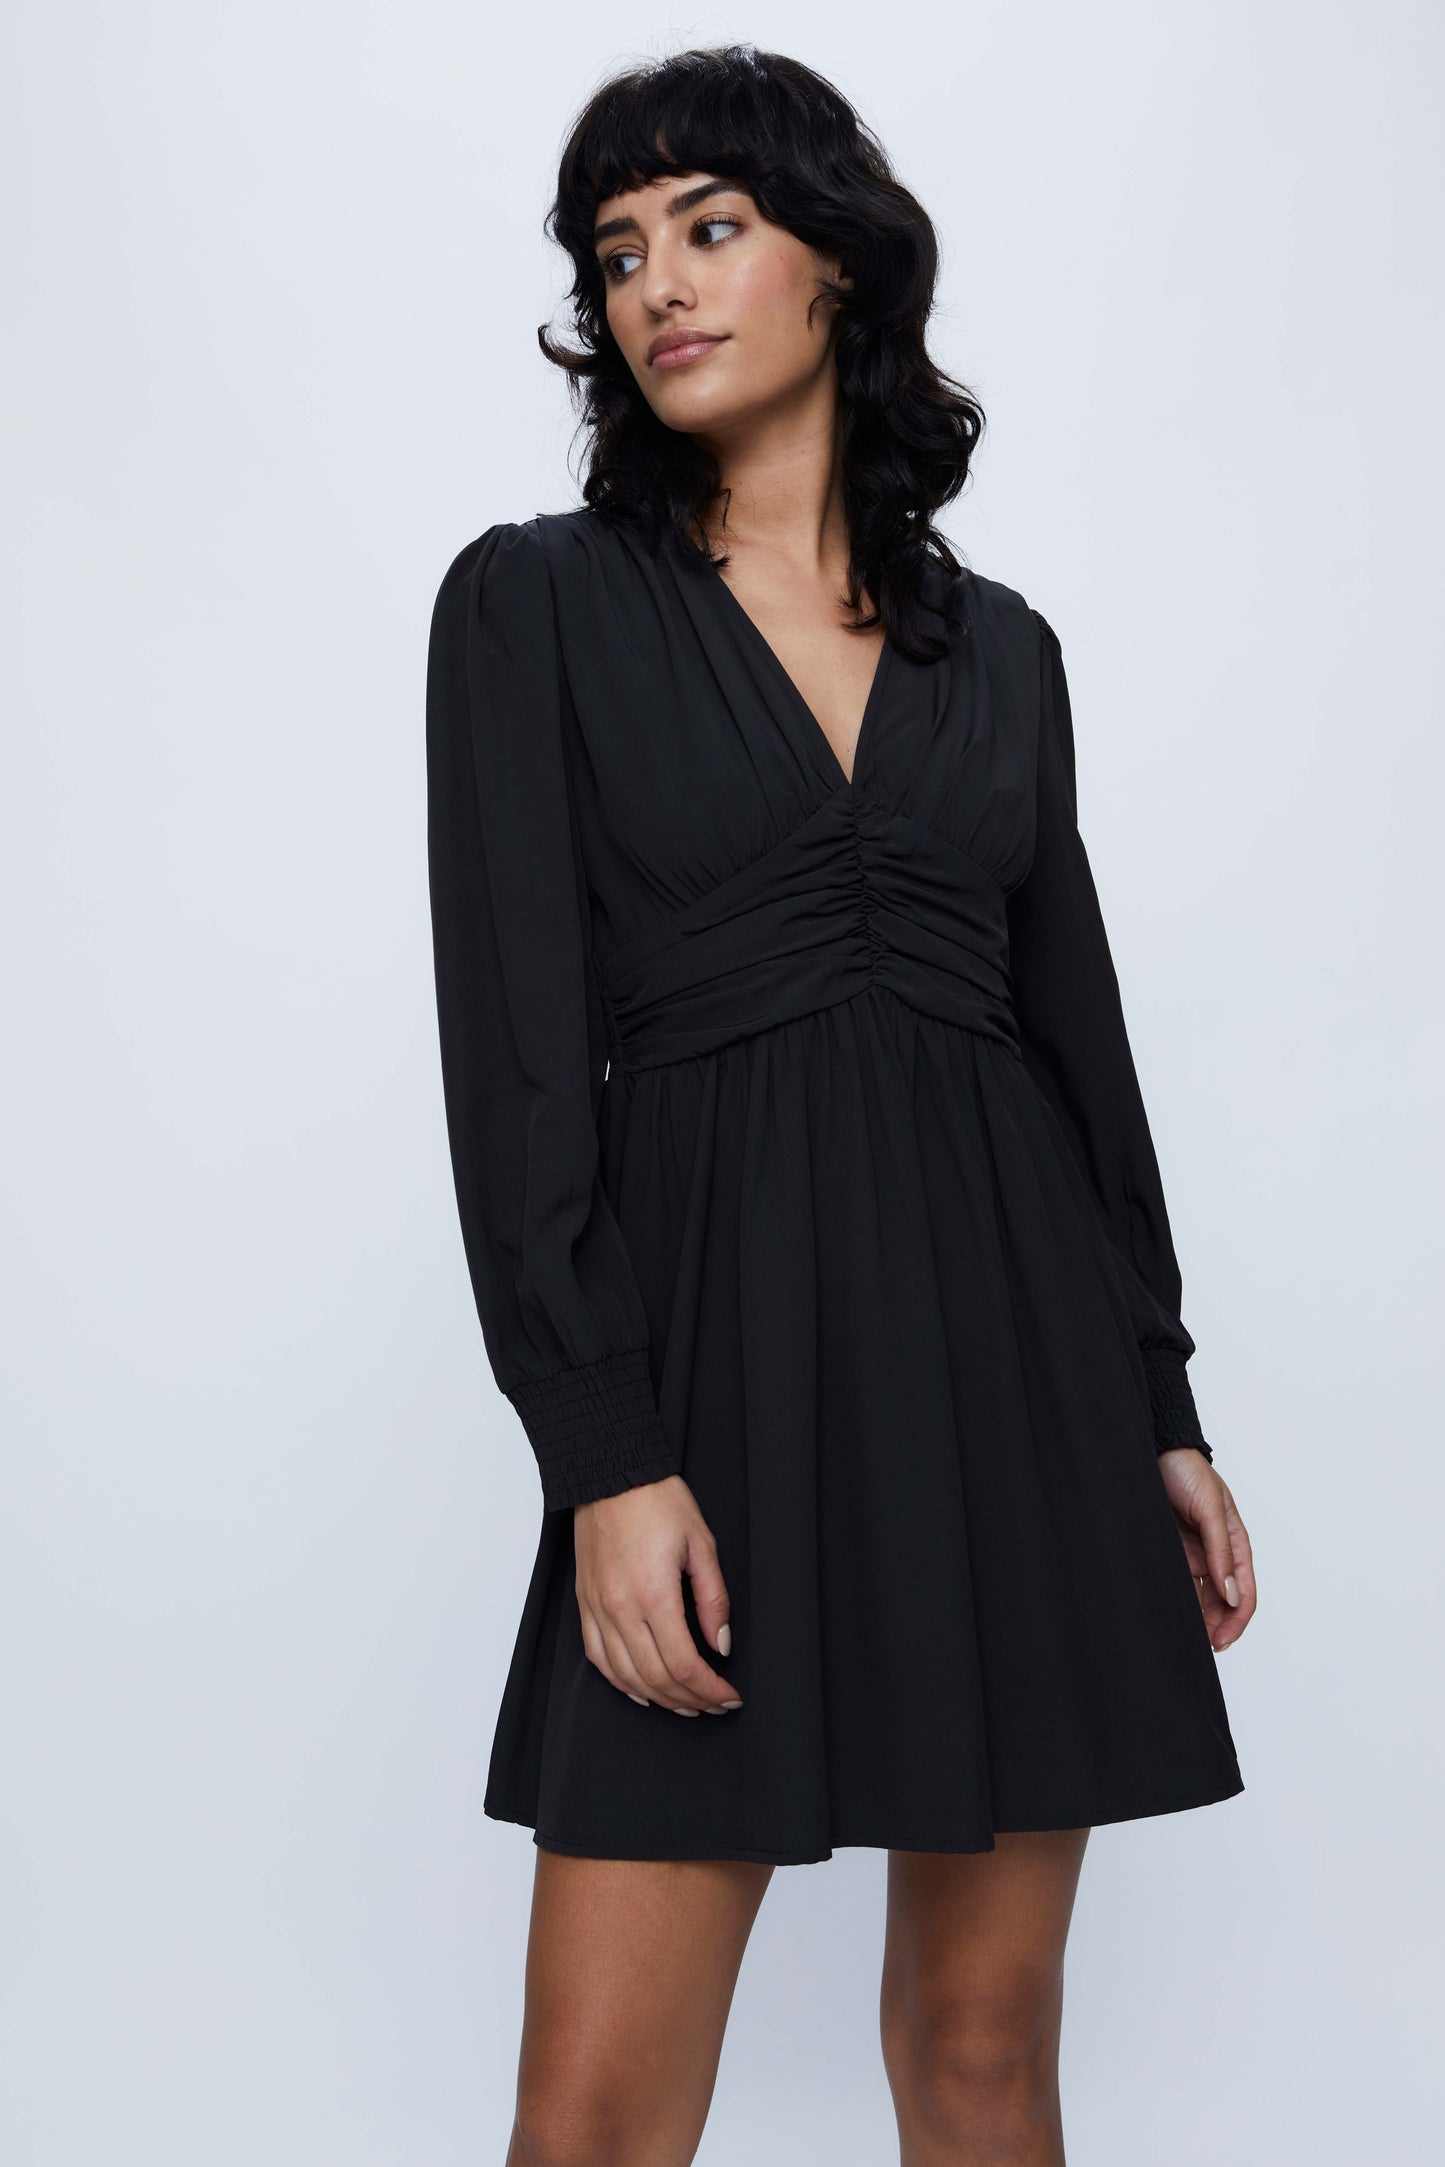 Short dress with long black sleeves